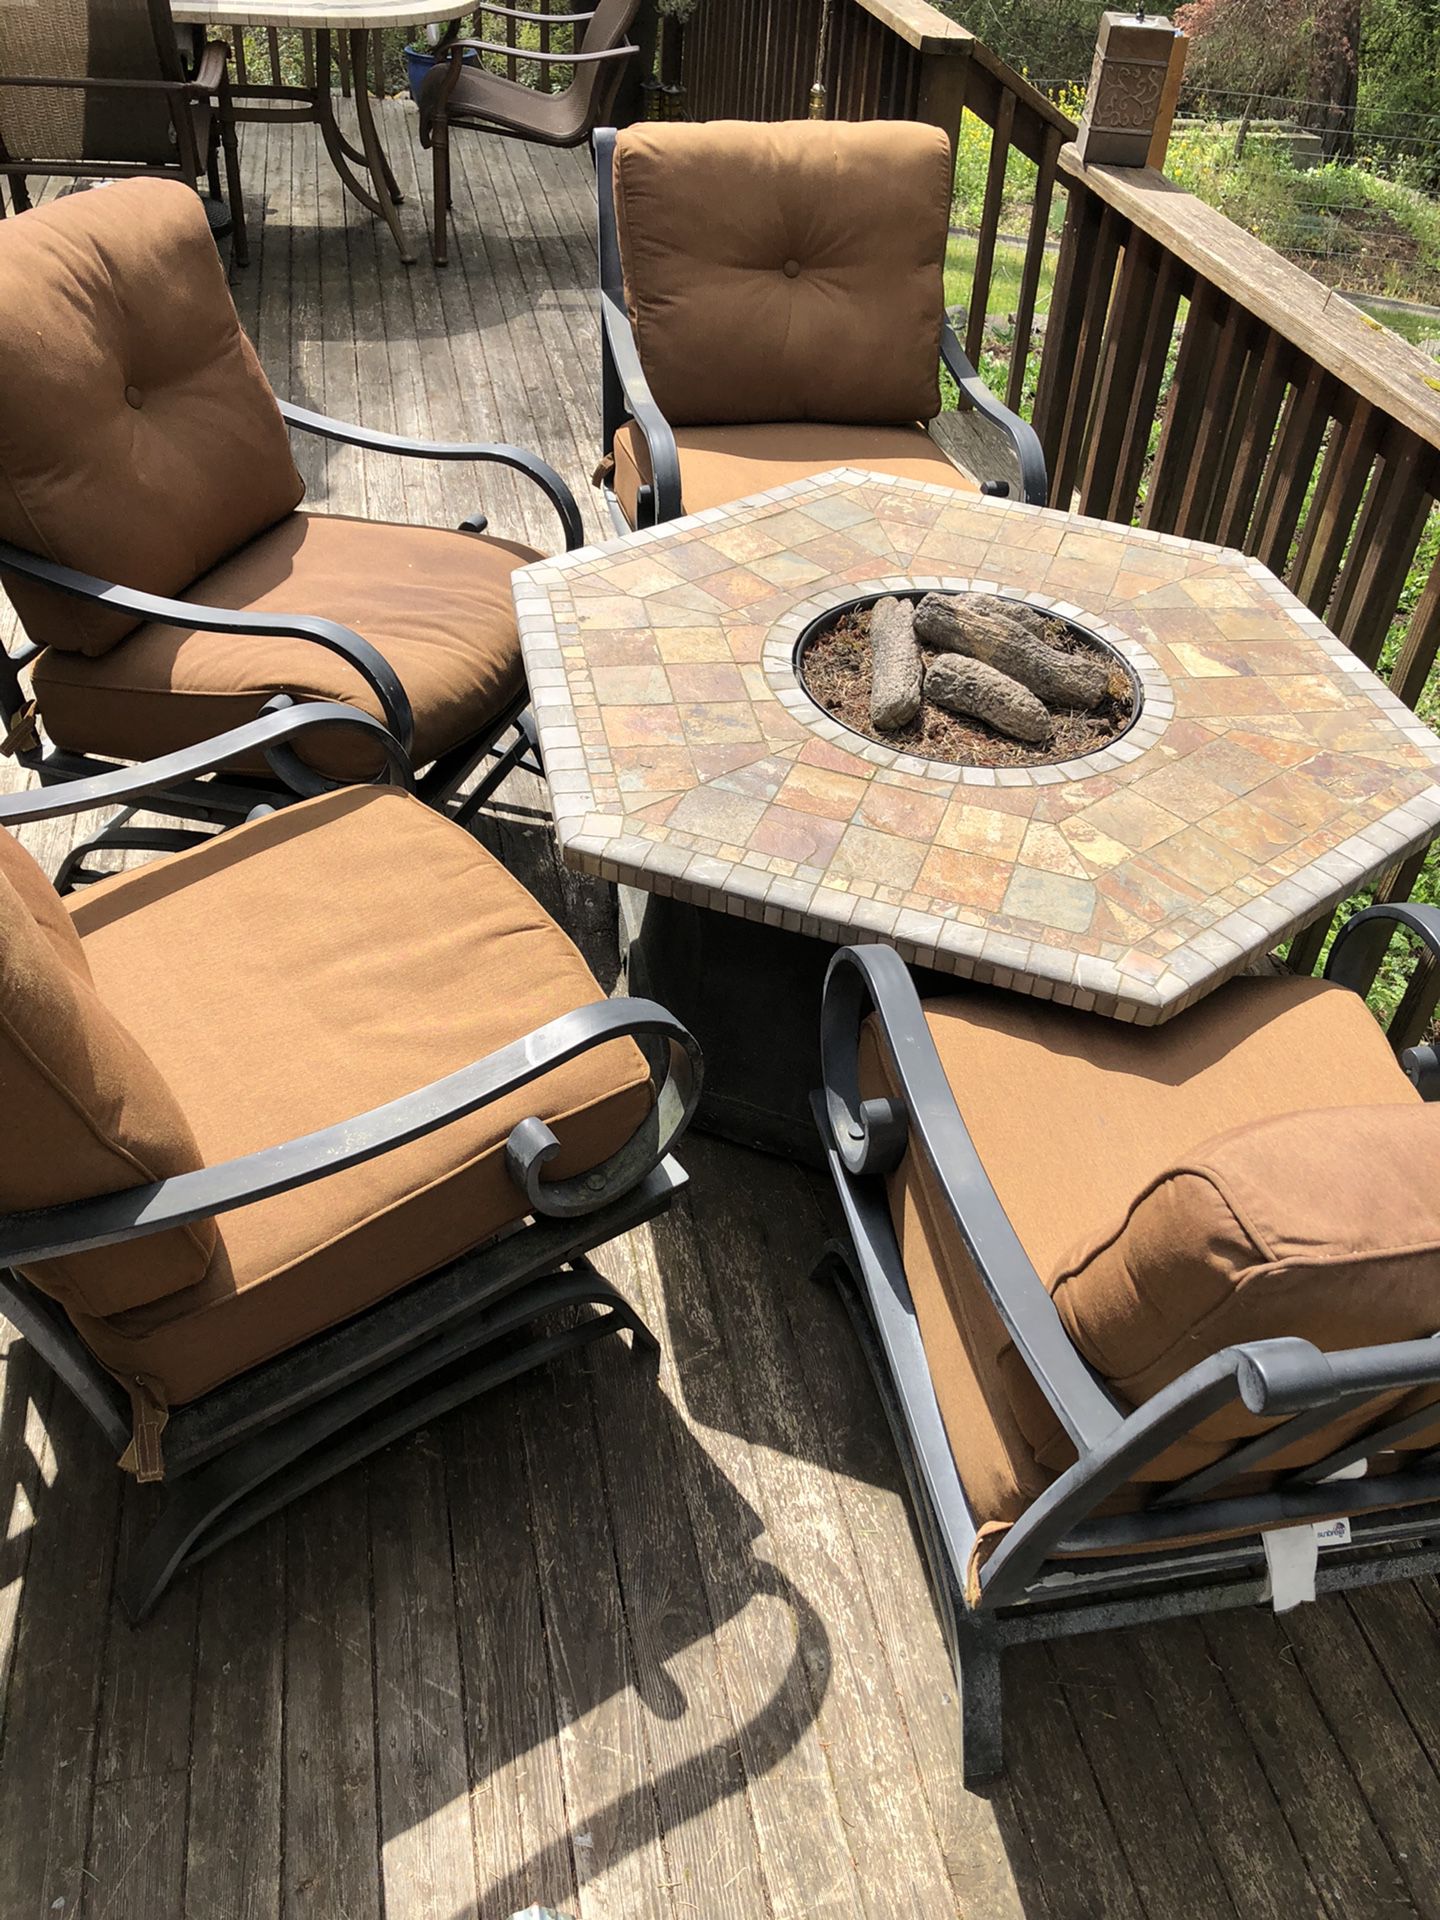 Costco fire pit with chairs